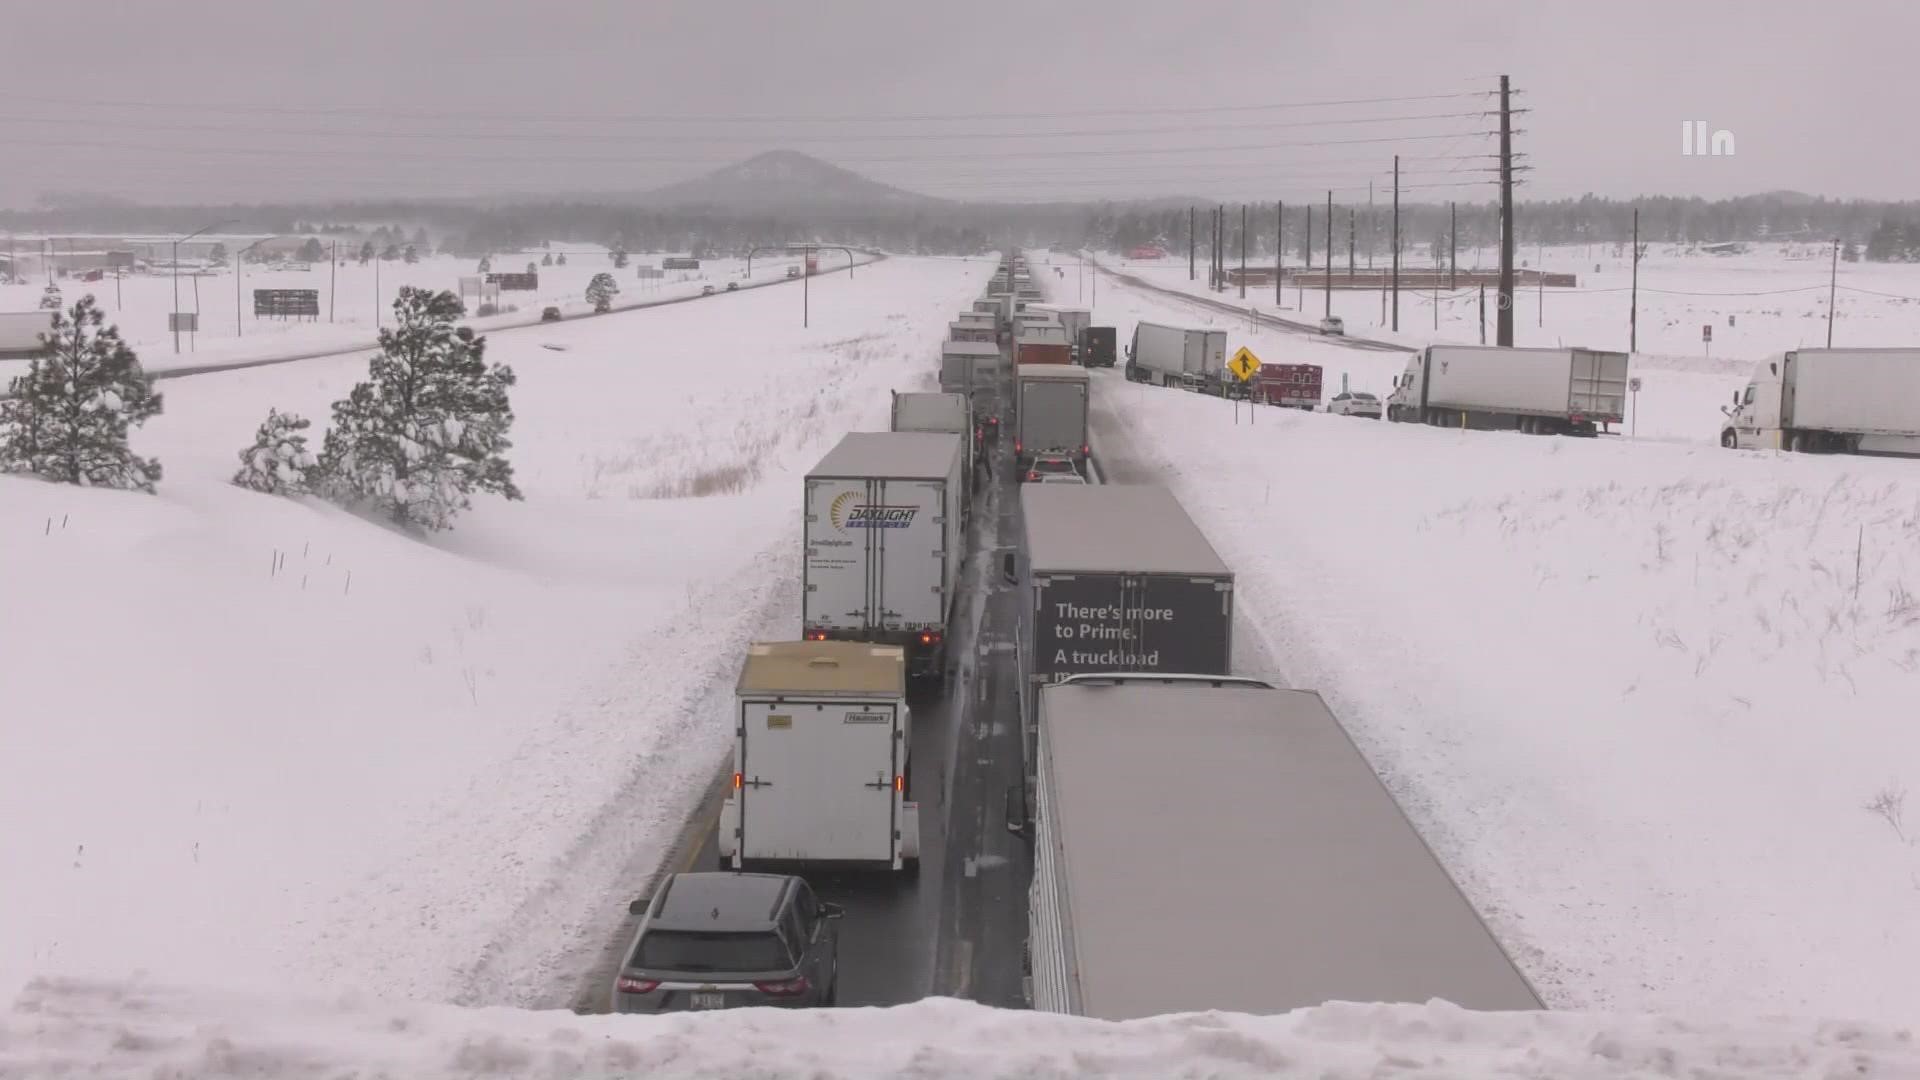 With snow falling in the Arizona high country, travelers are facing hazardous roads.